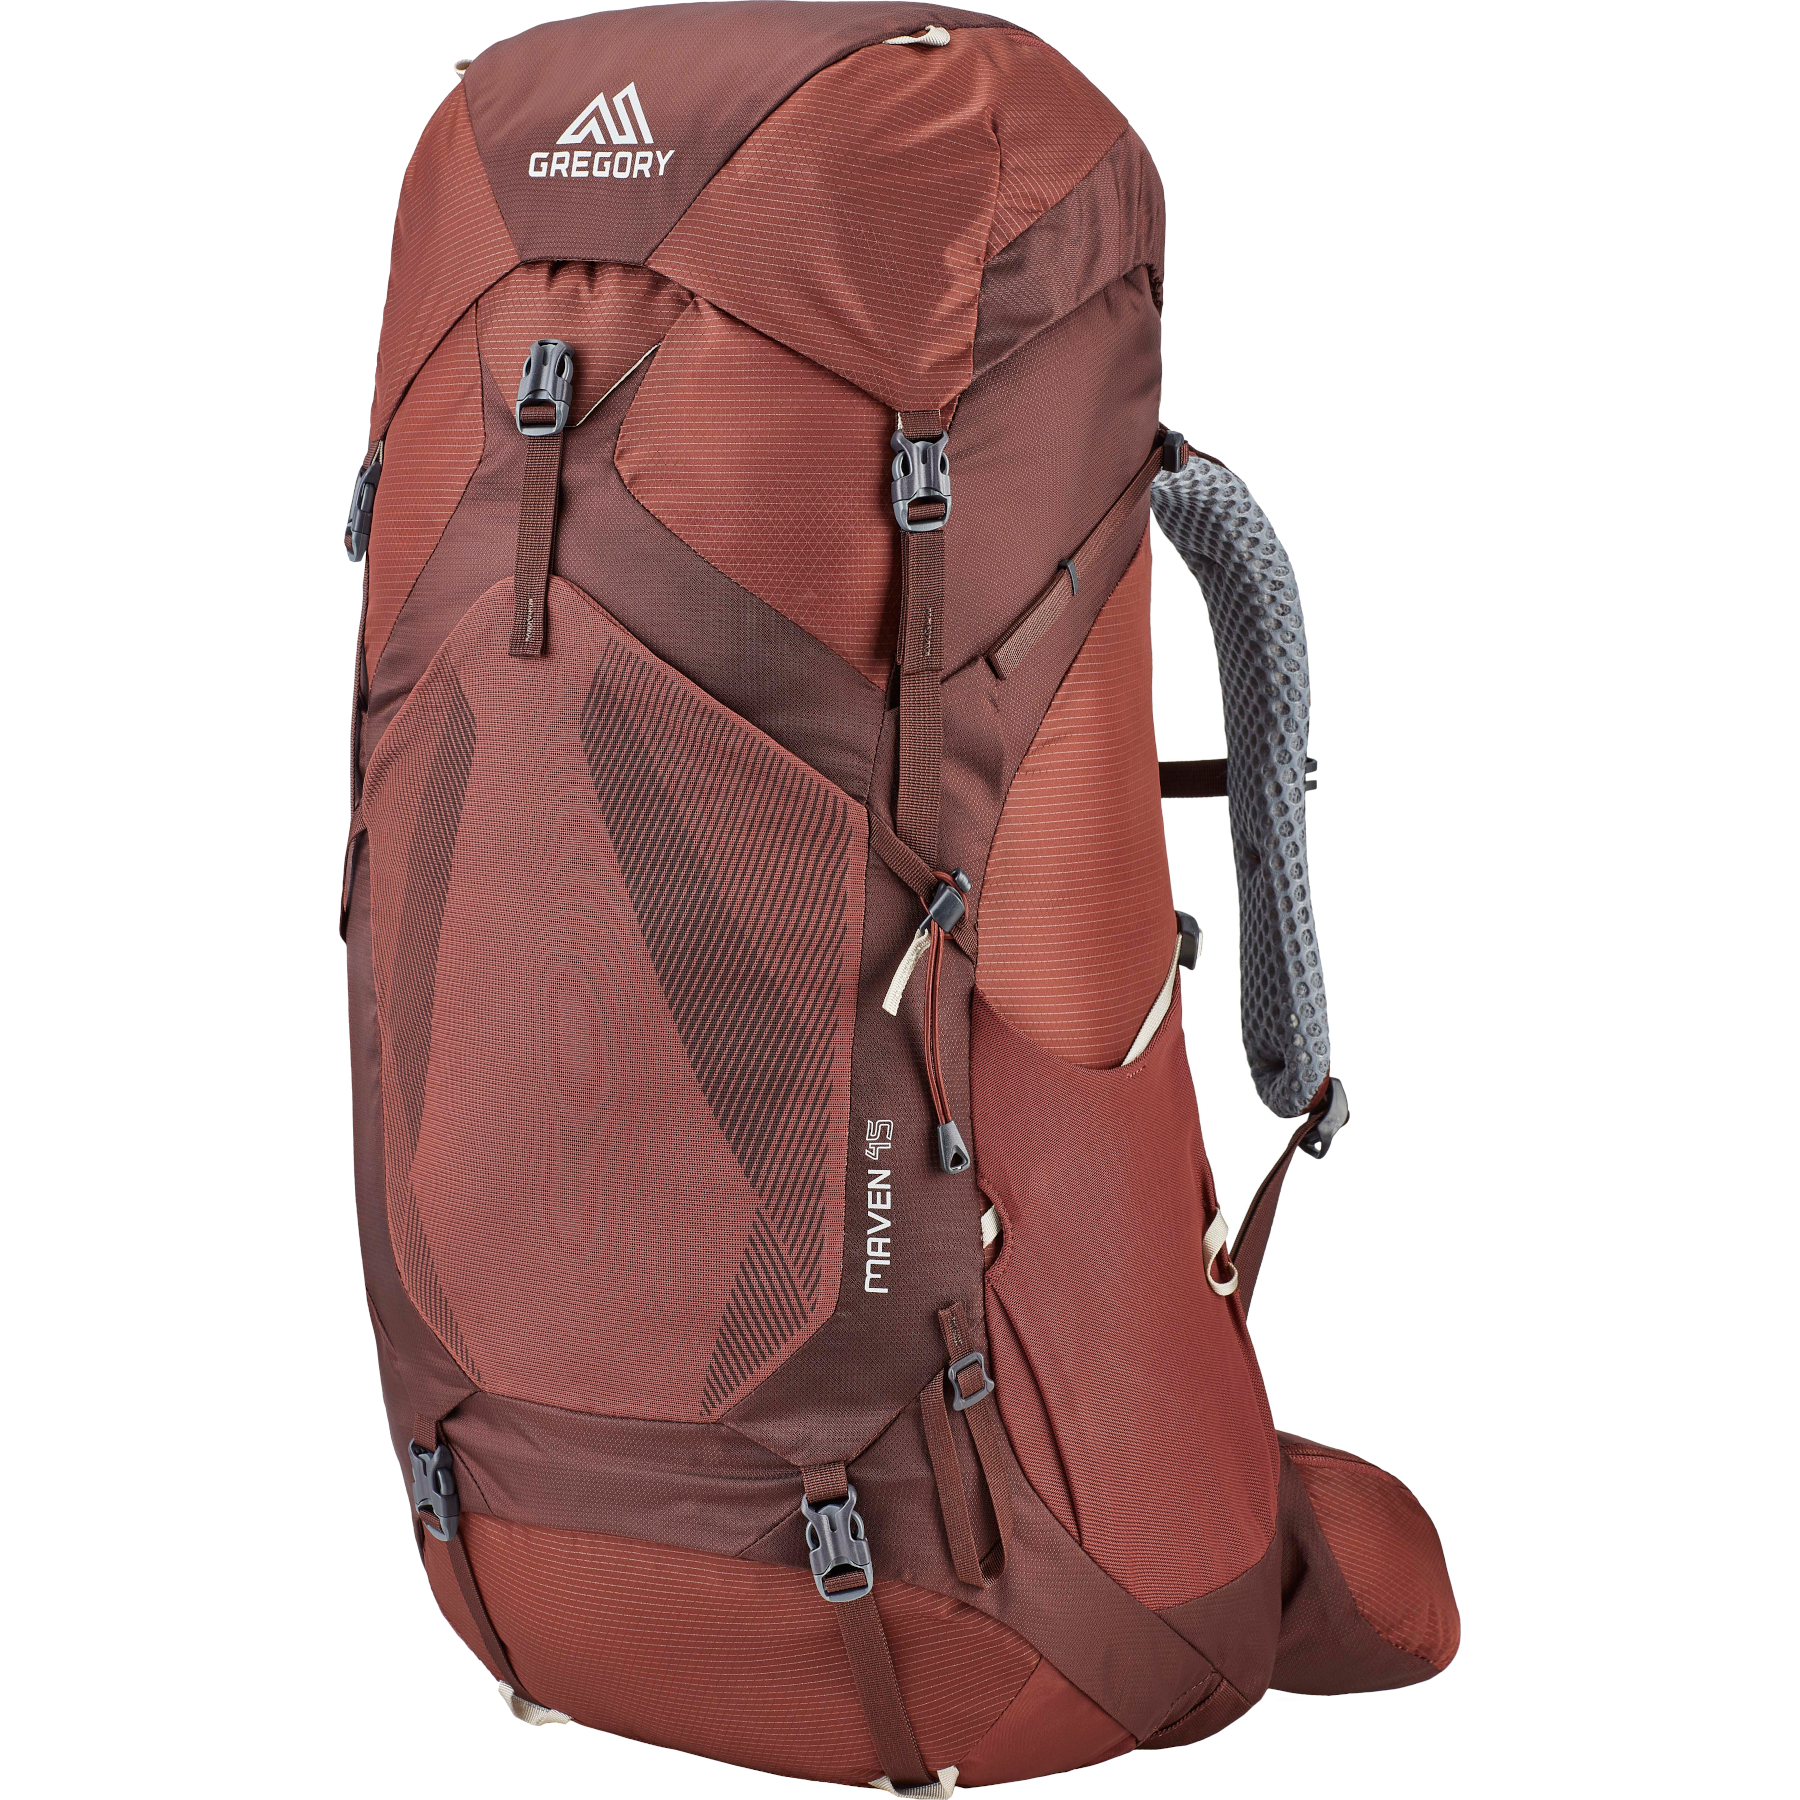 Image of Gregory Maven 45 Women's Backpack - Rosewood Red